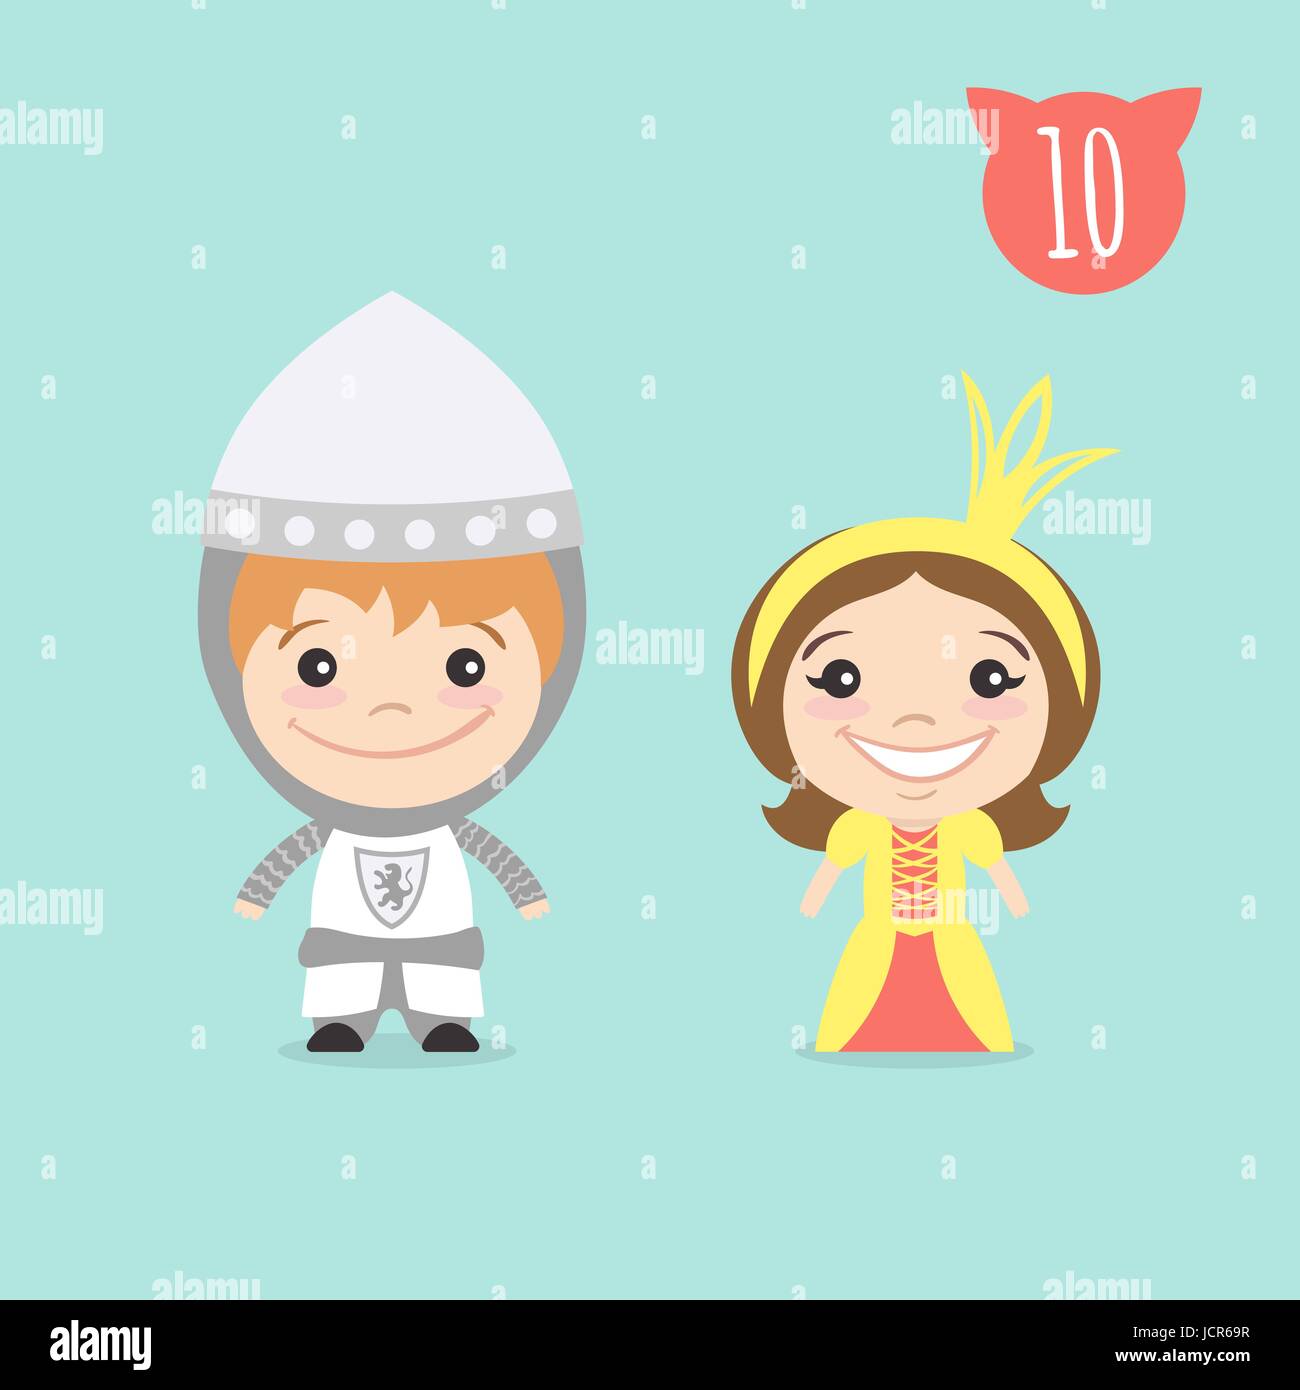 Vector illustration of two happy cute kids characters. Boy in Knight costume and a girl in princess costume. Stock Vector